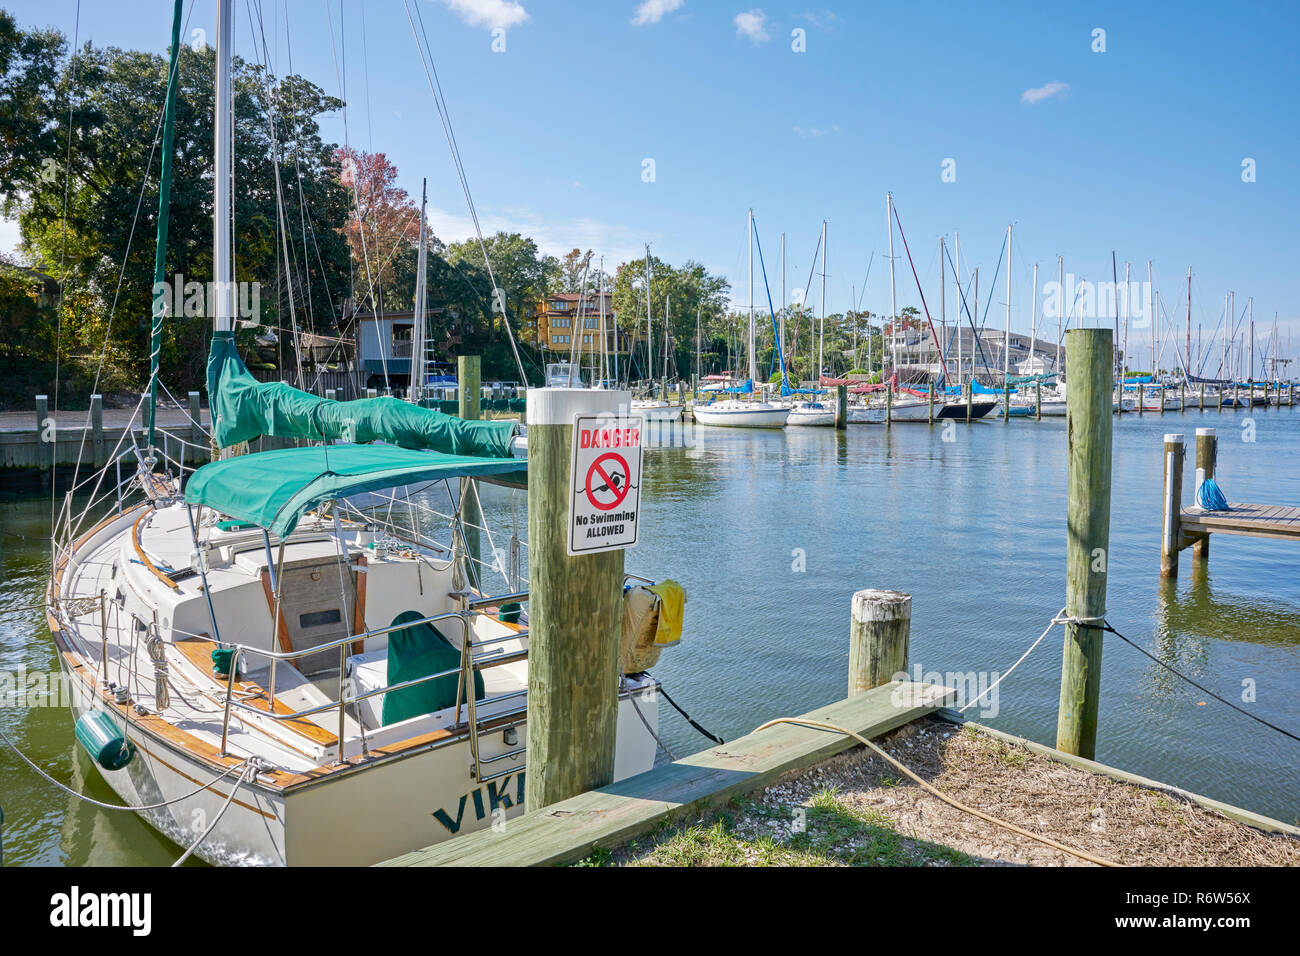 Sailboats tied up and lined up in boat slips at Fly Creek Marina on Mobile Bay, in Fairhope Alabama, USA. Stock Photo